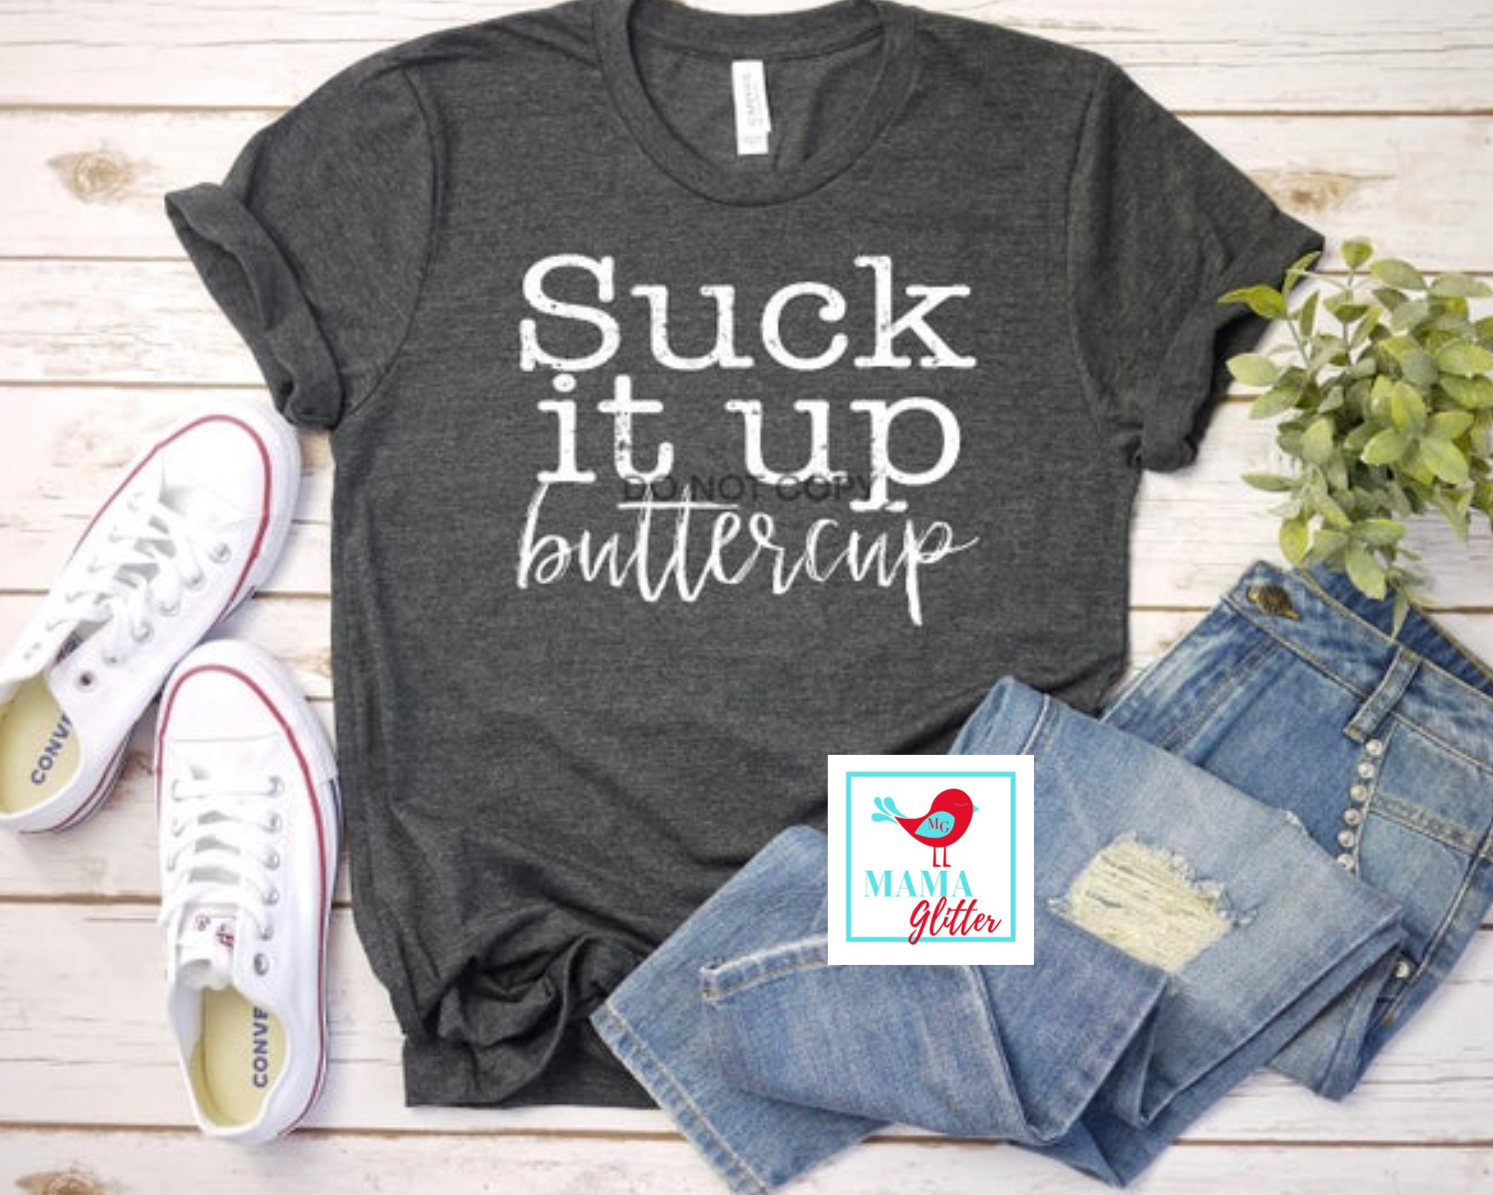 Suck it up Buttercup - White Print